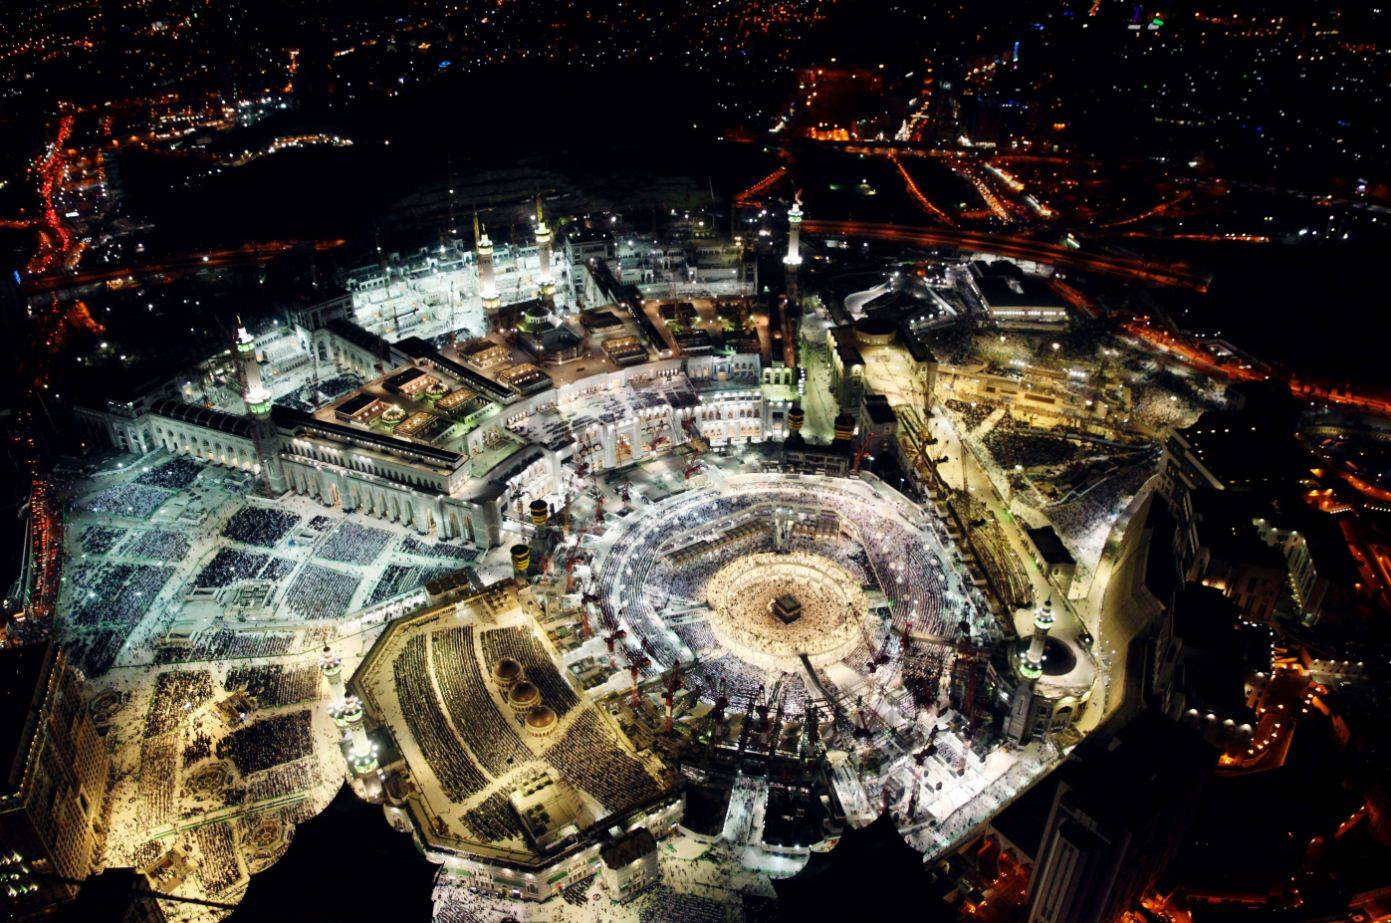 A picture taken from the Abraj al-Bait Towers, also known as the Mecca Royal Hotel Clock Tower, shows Muslim worshipers praying at the Grand Mosque in the Muslim holy city of Mecca, a day before the end of the fasting month of Ramadan. The Grand Mosque, which contains Islam's holiest site the Kaaba, can now hold 1.85 million people. (AFP) 